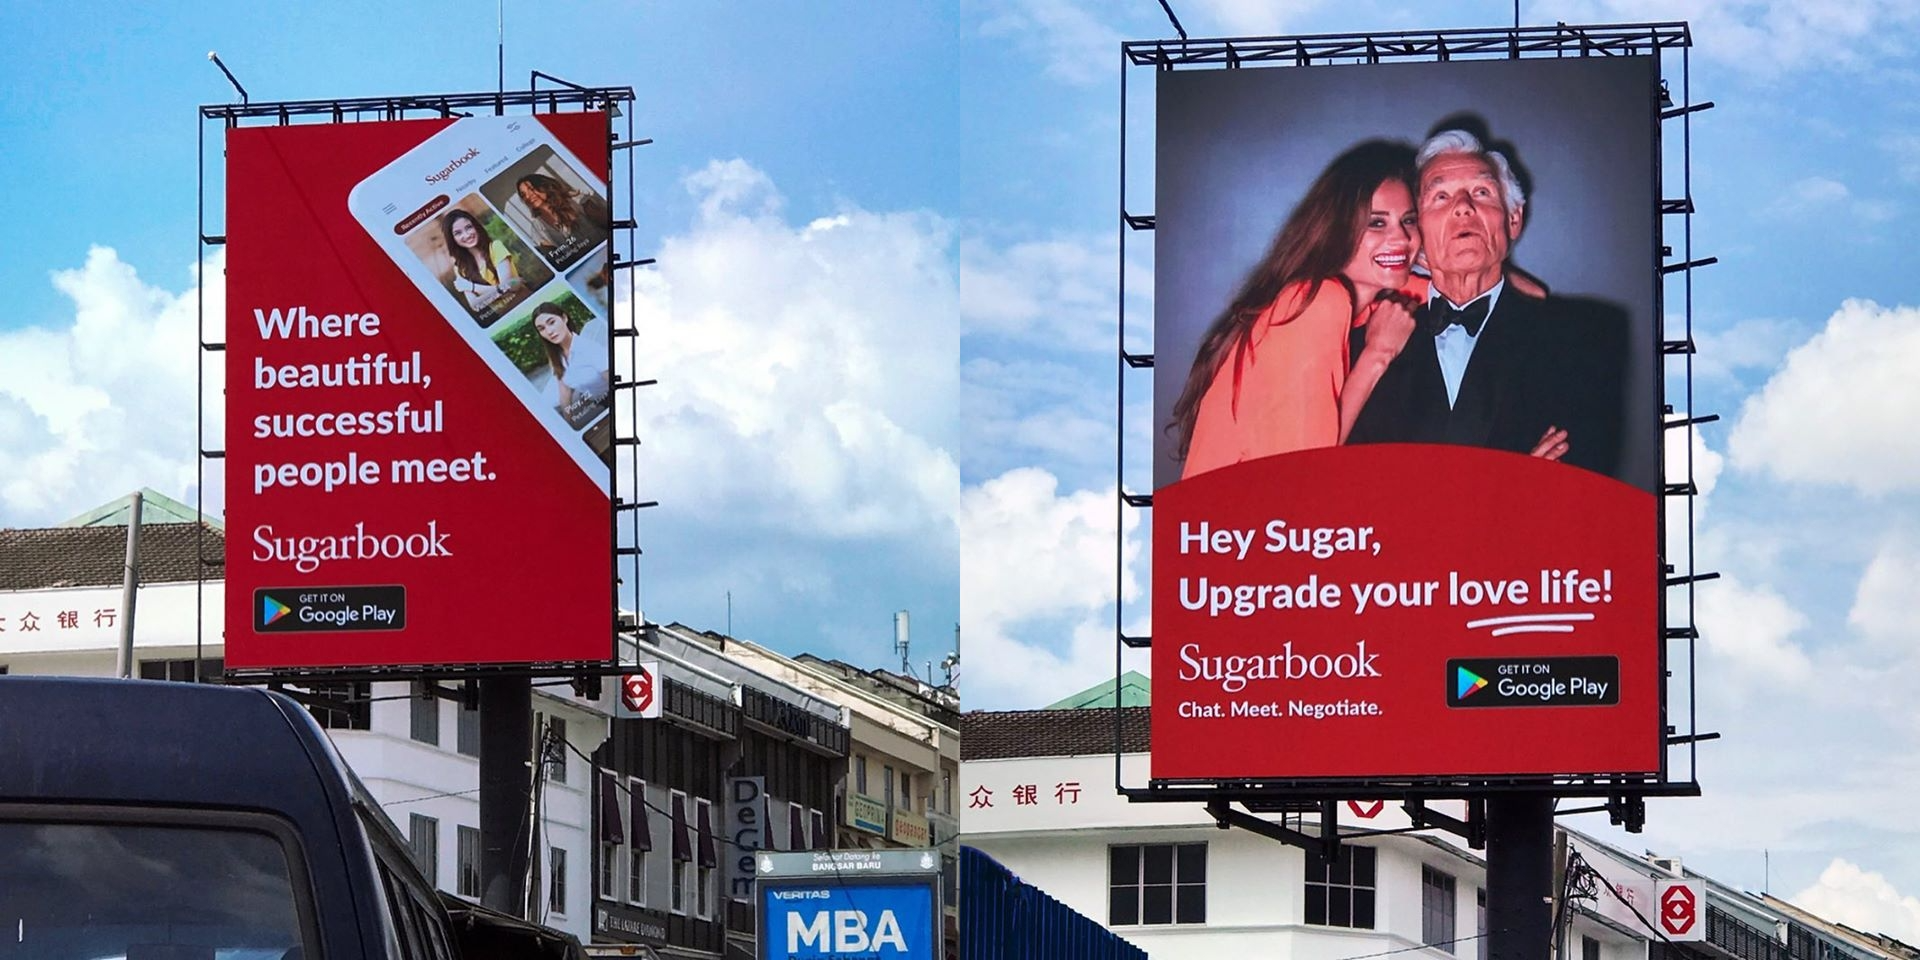 Sugarbook's billboard hang on street stir up controversy